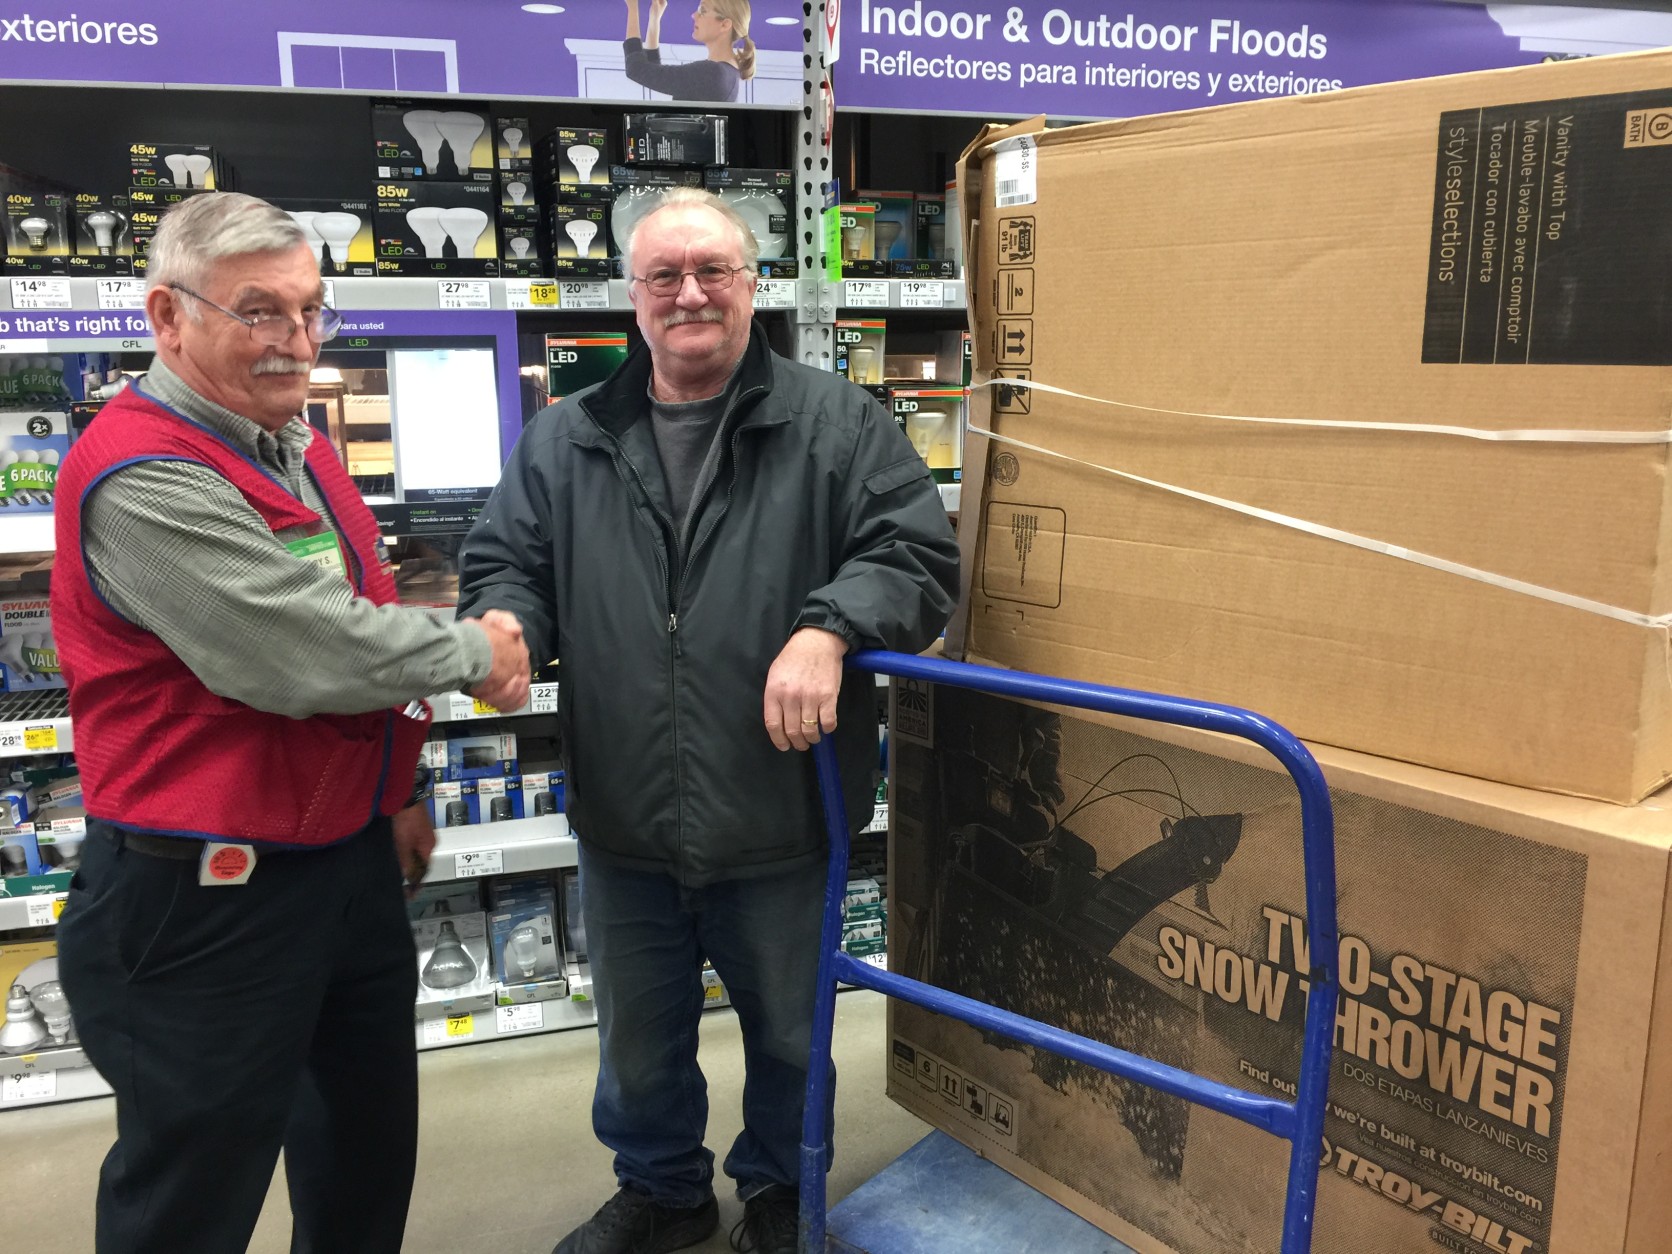 Bob Delong of Clifton, Va. will use this now thrower on his 200 foot driveway and to clear pasture areas for his horses. He and Lowe's Department Manager Larry Schultz have been friends for years.